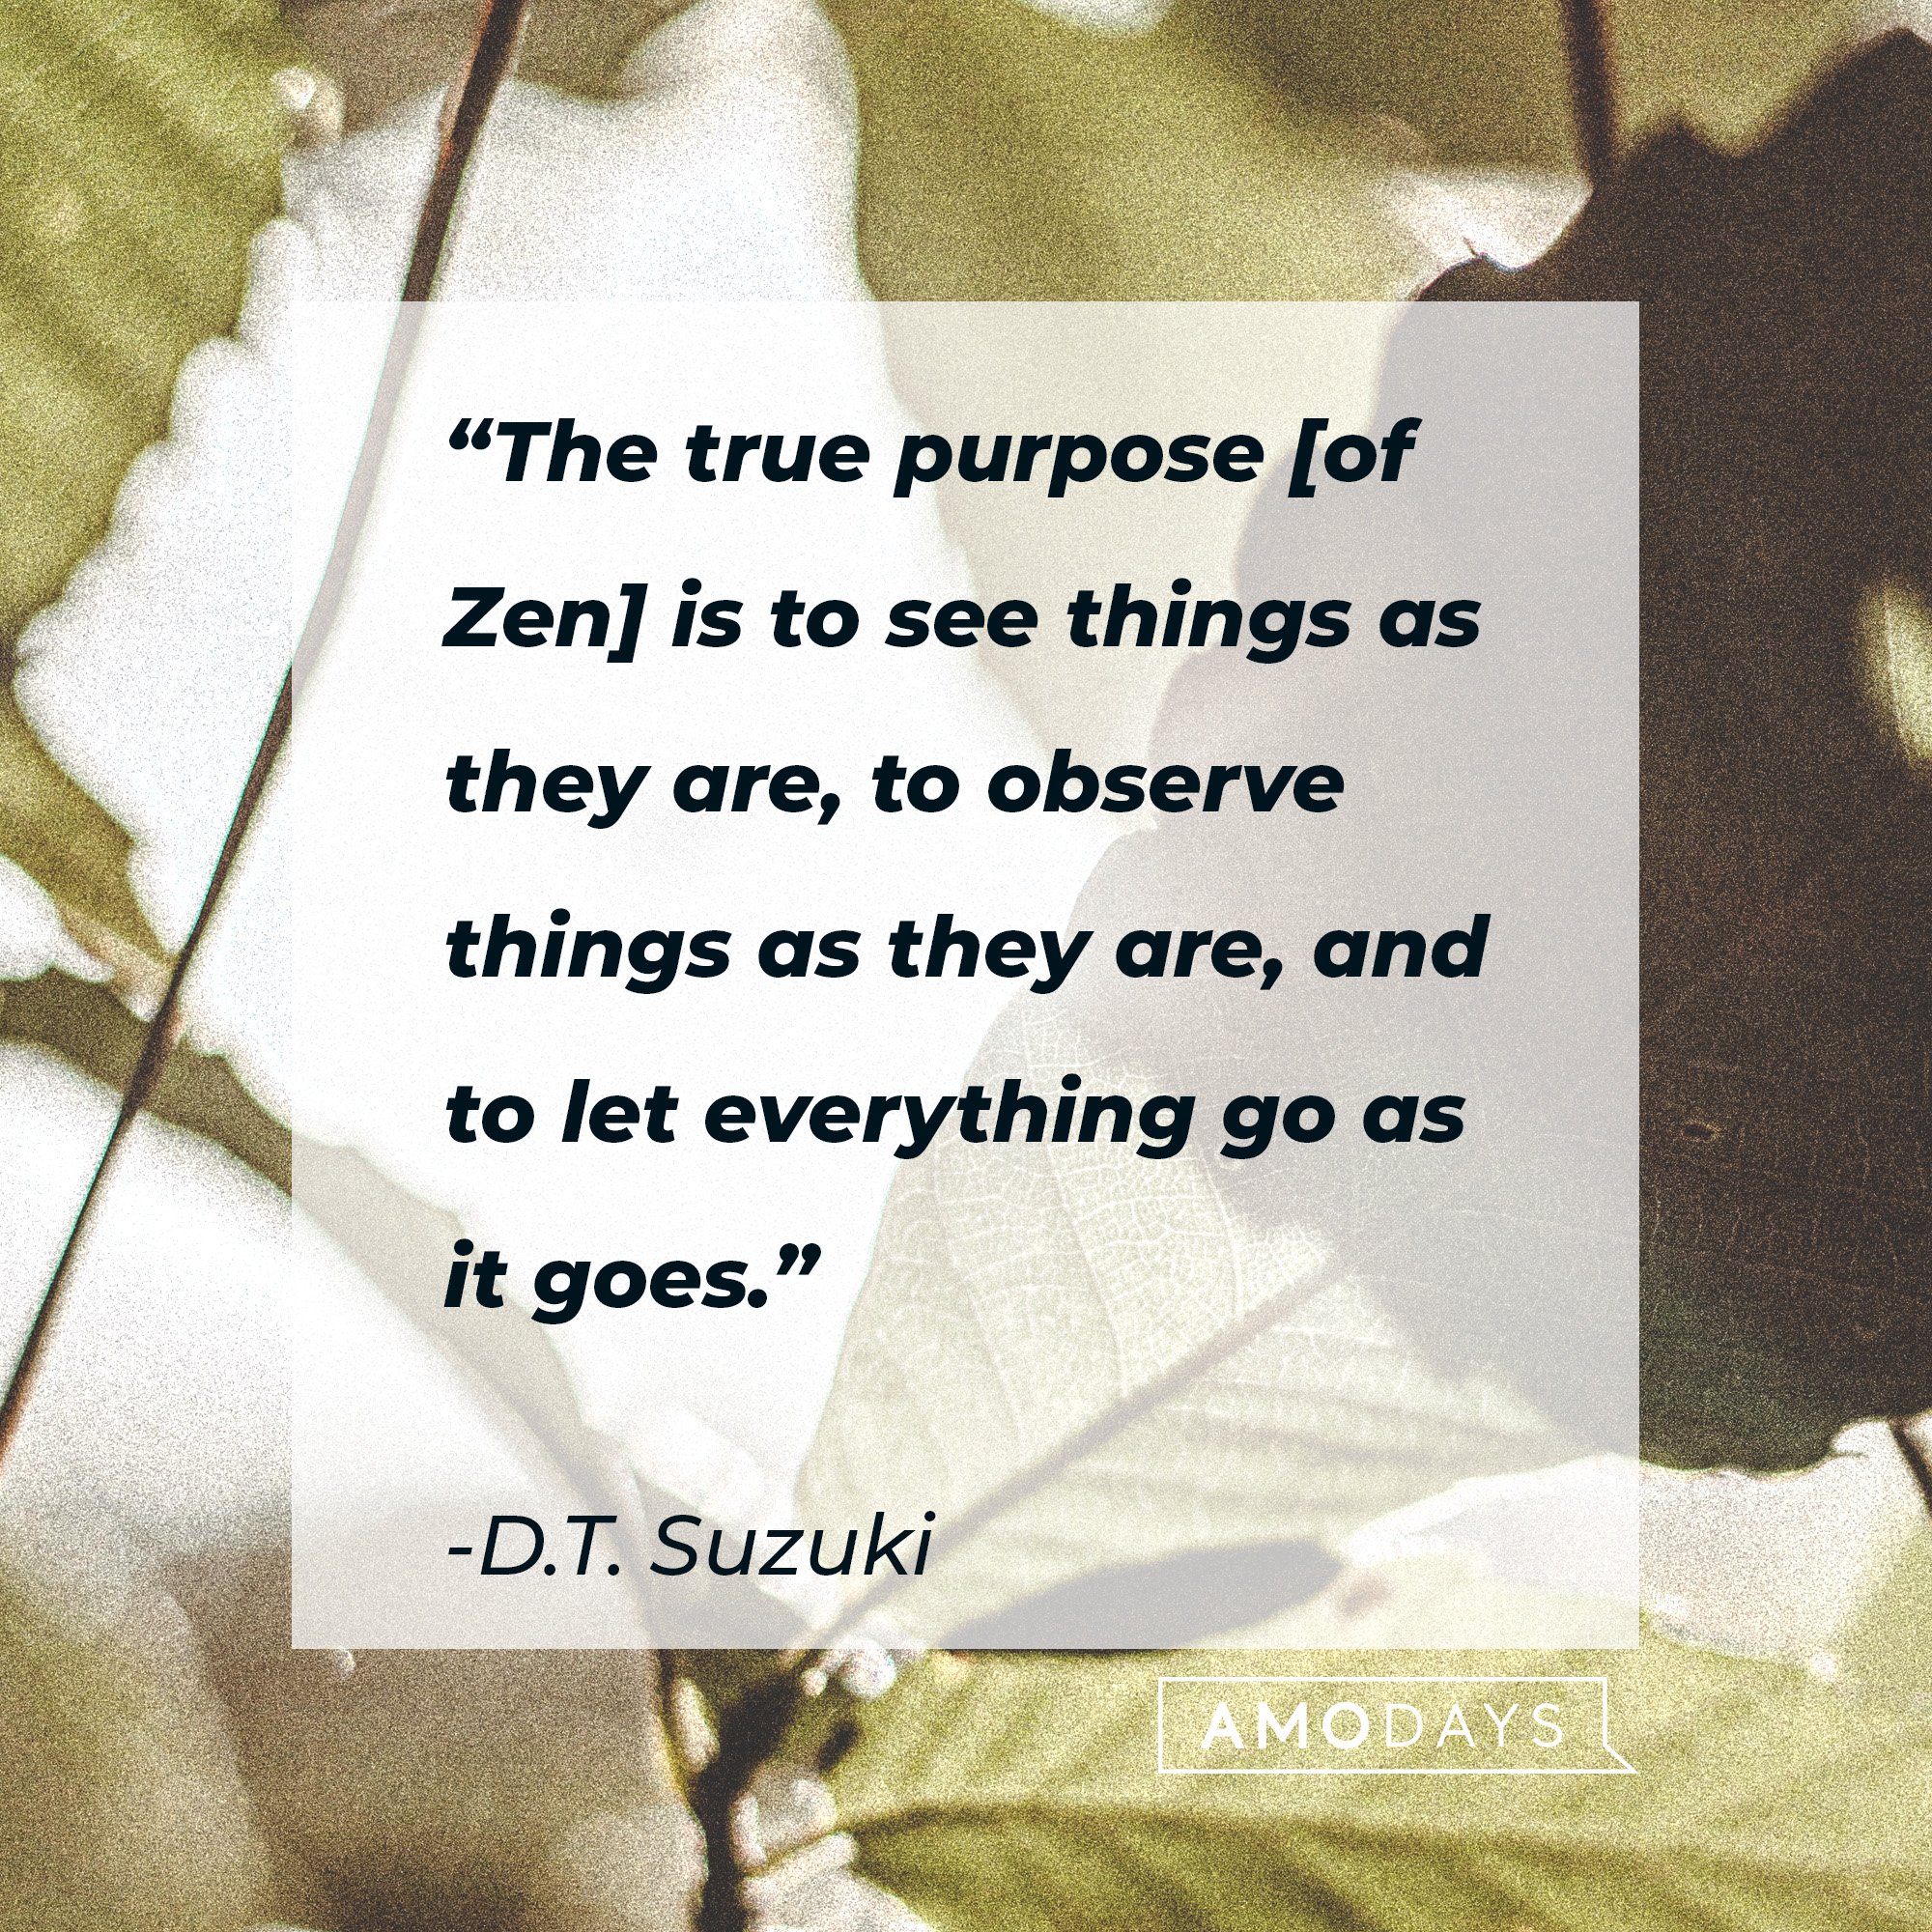 D.T. Suzuki's quote: “The true purpose [of Zen] is to see things as they are, to observe things as they are, and to let everything go as it goes.” | Image: AmoDays